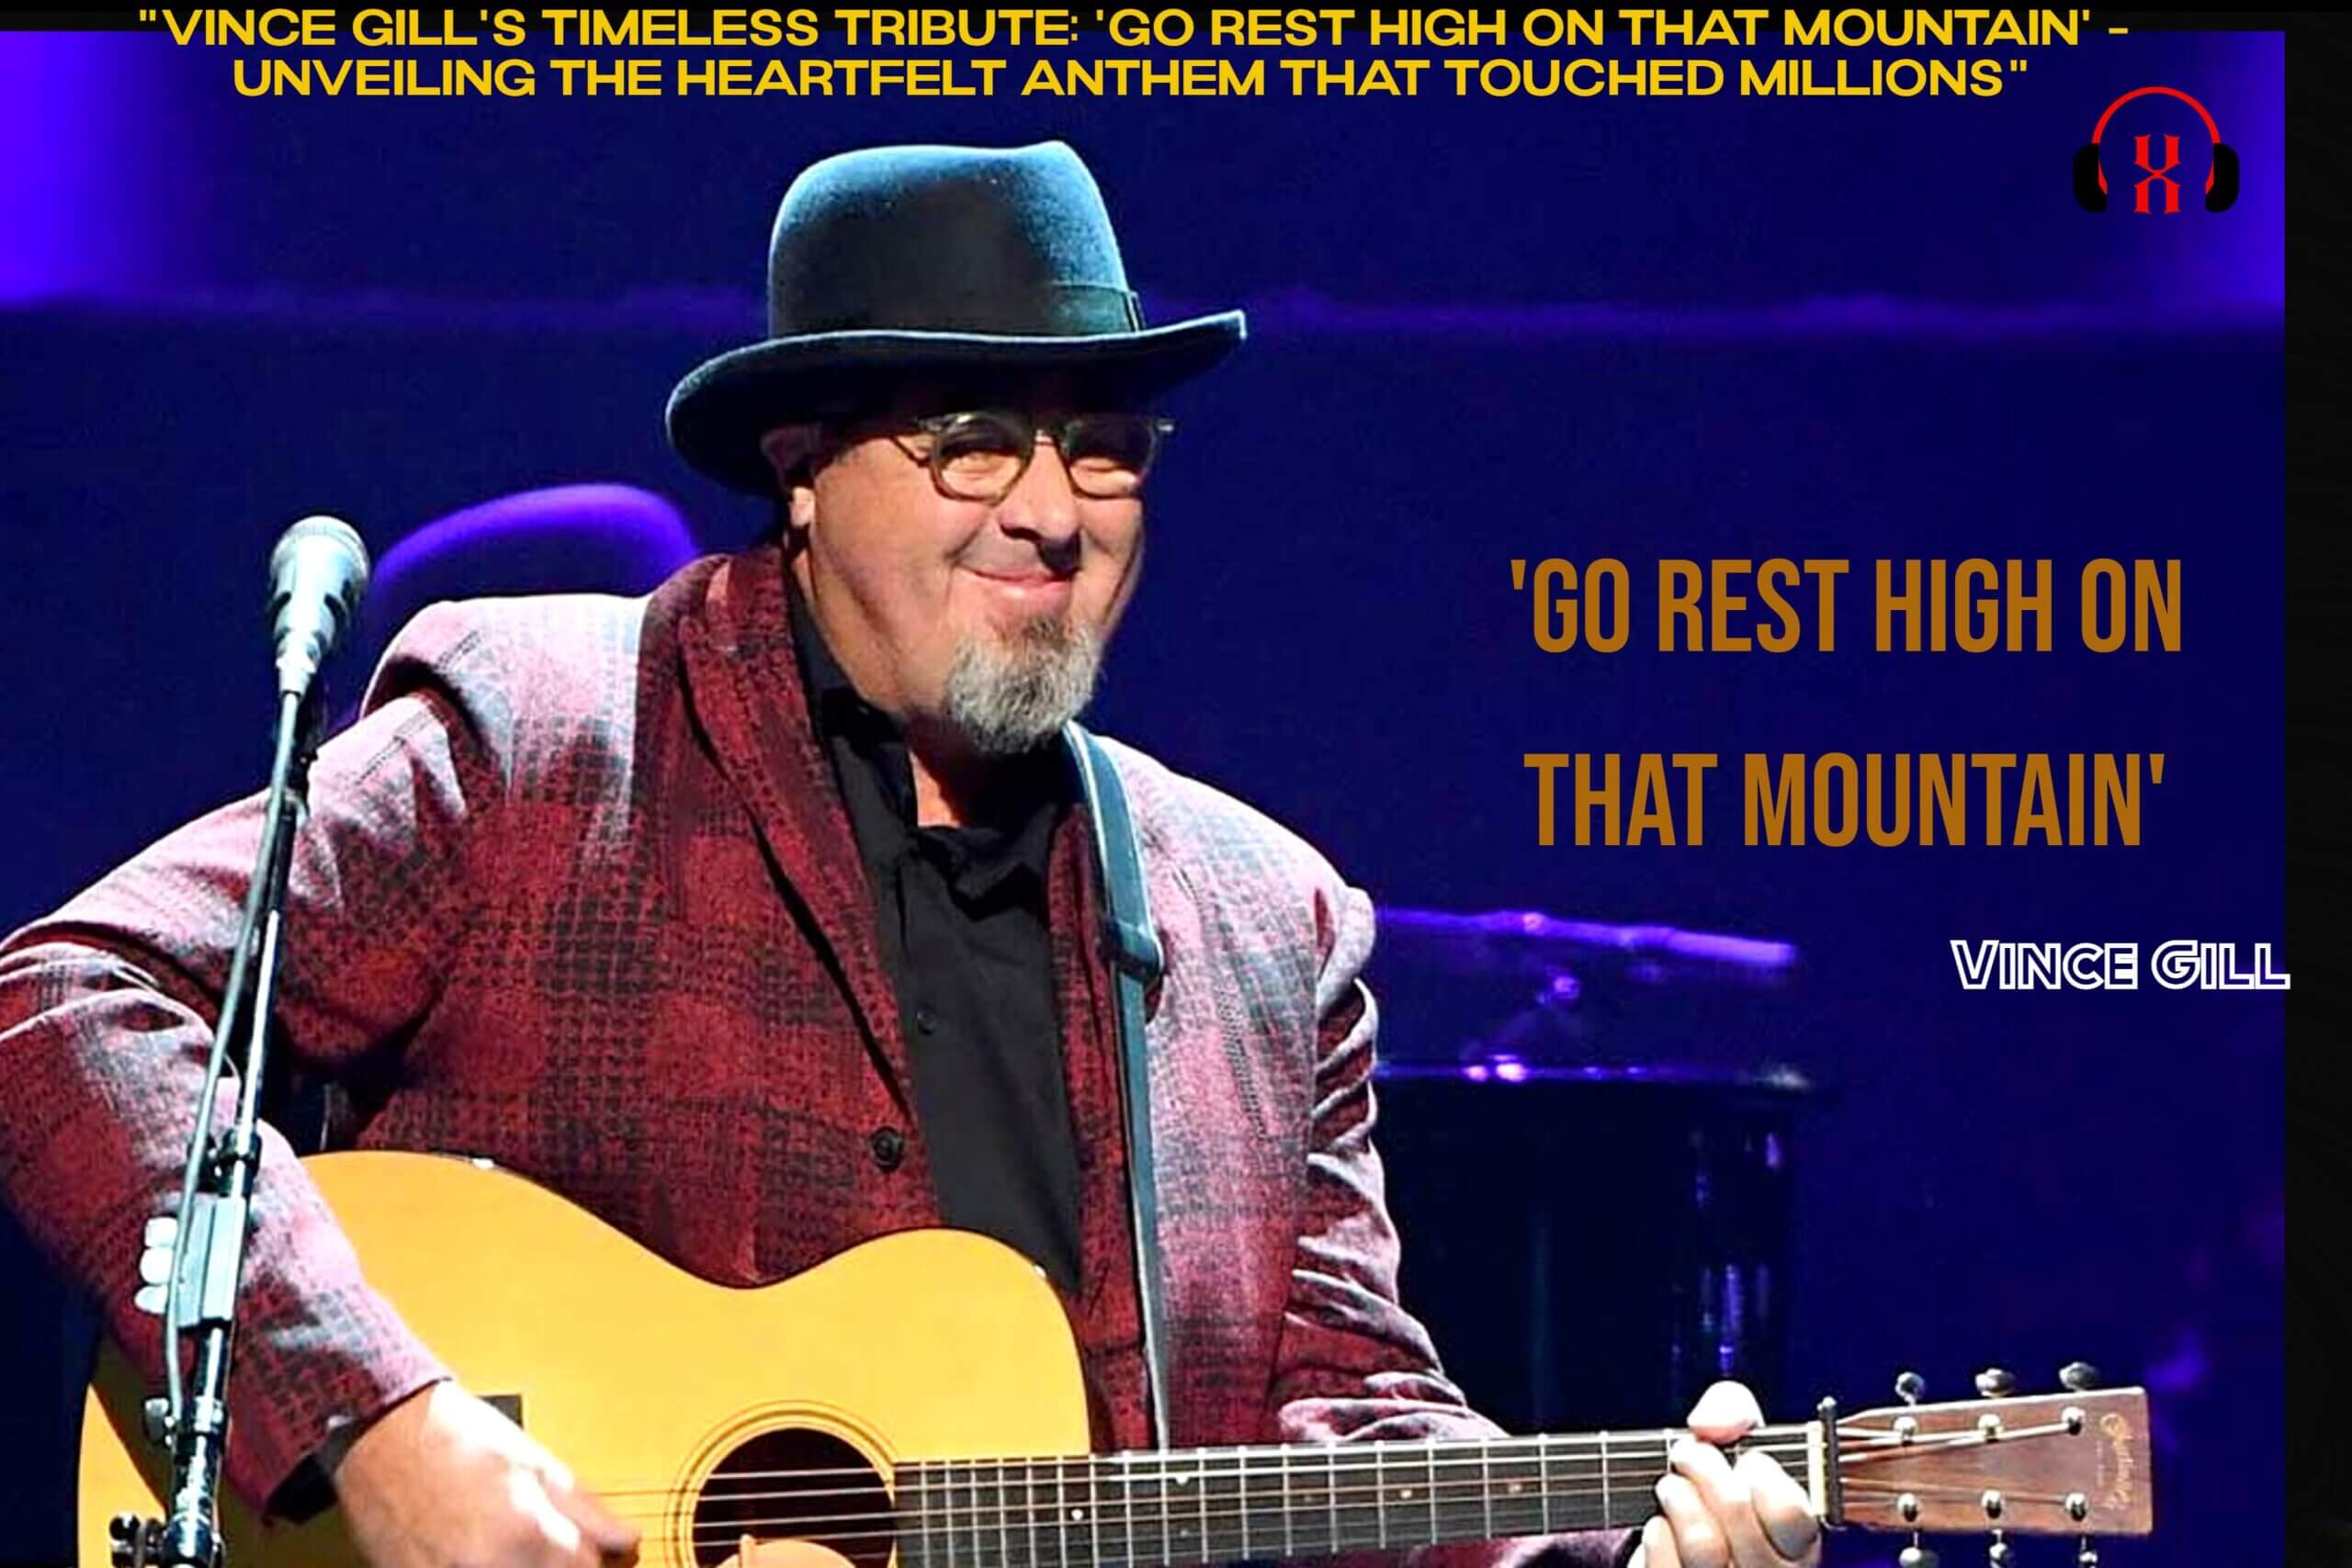 "Vince Gill's Timeless Tribute: 'Go Rest High on That Mountain' - Unveiling the Heartfelt Anthem that Touched Millions"